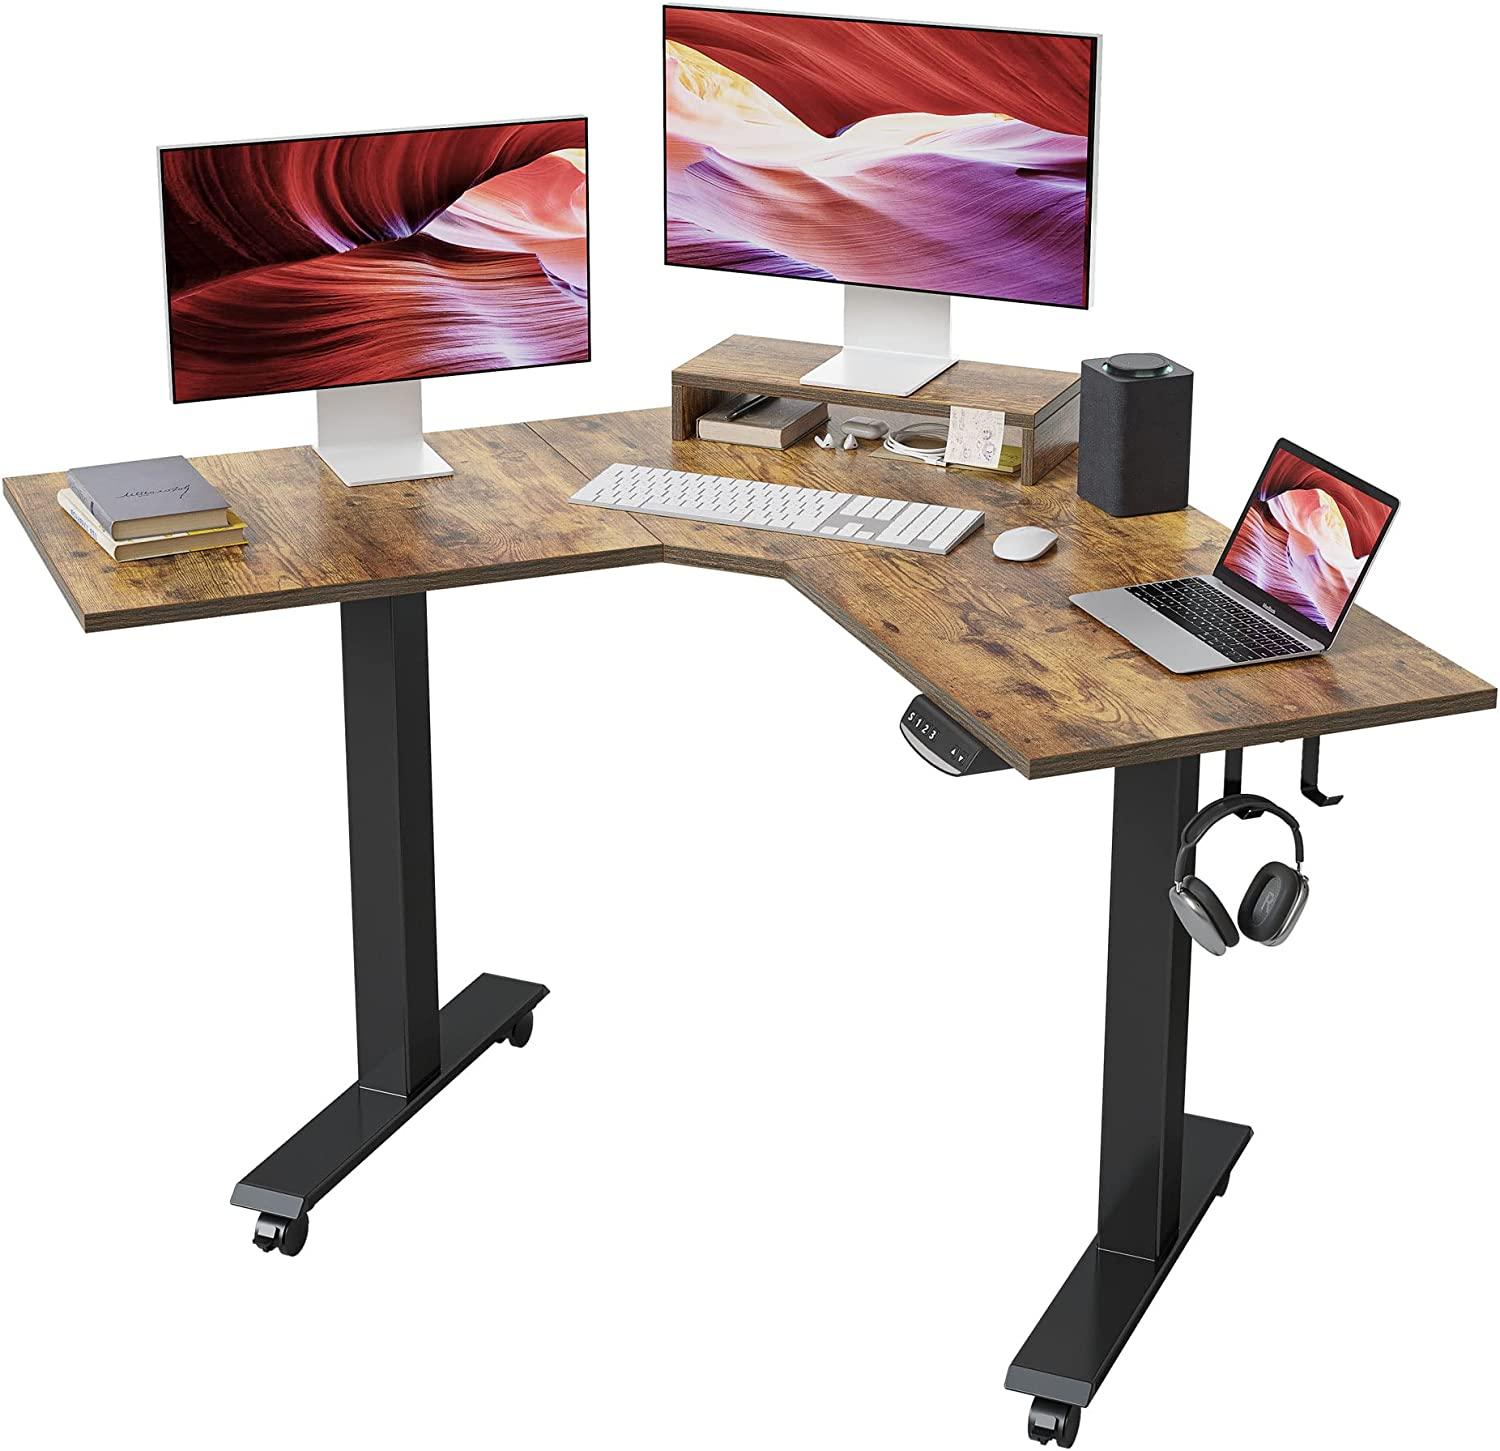 Dual Motor L Shaped 48in Electric Standing Desk for $279.99 Shipped